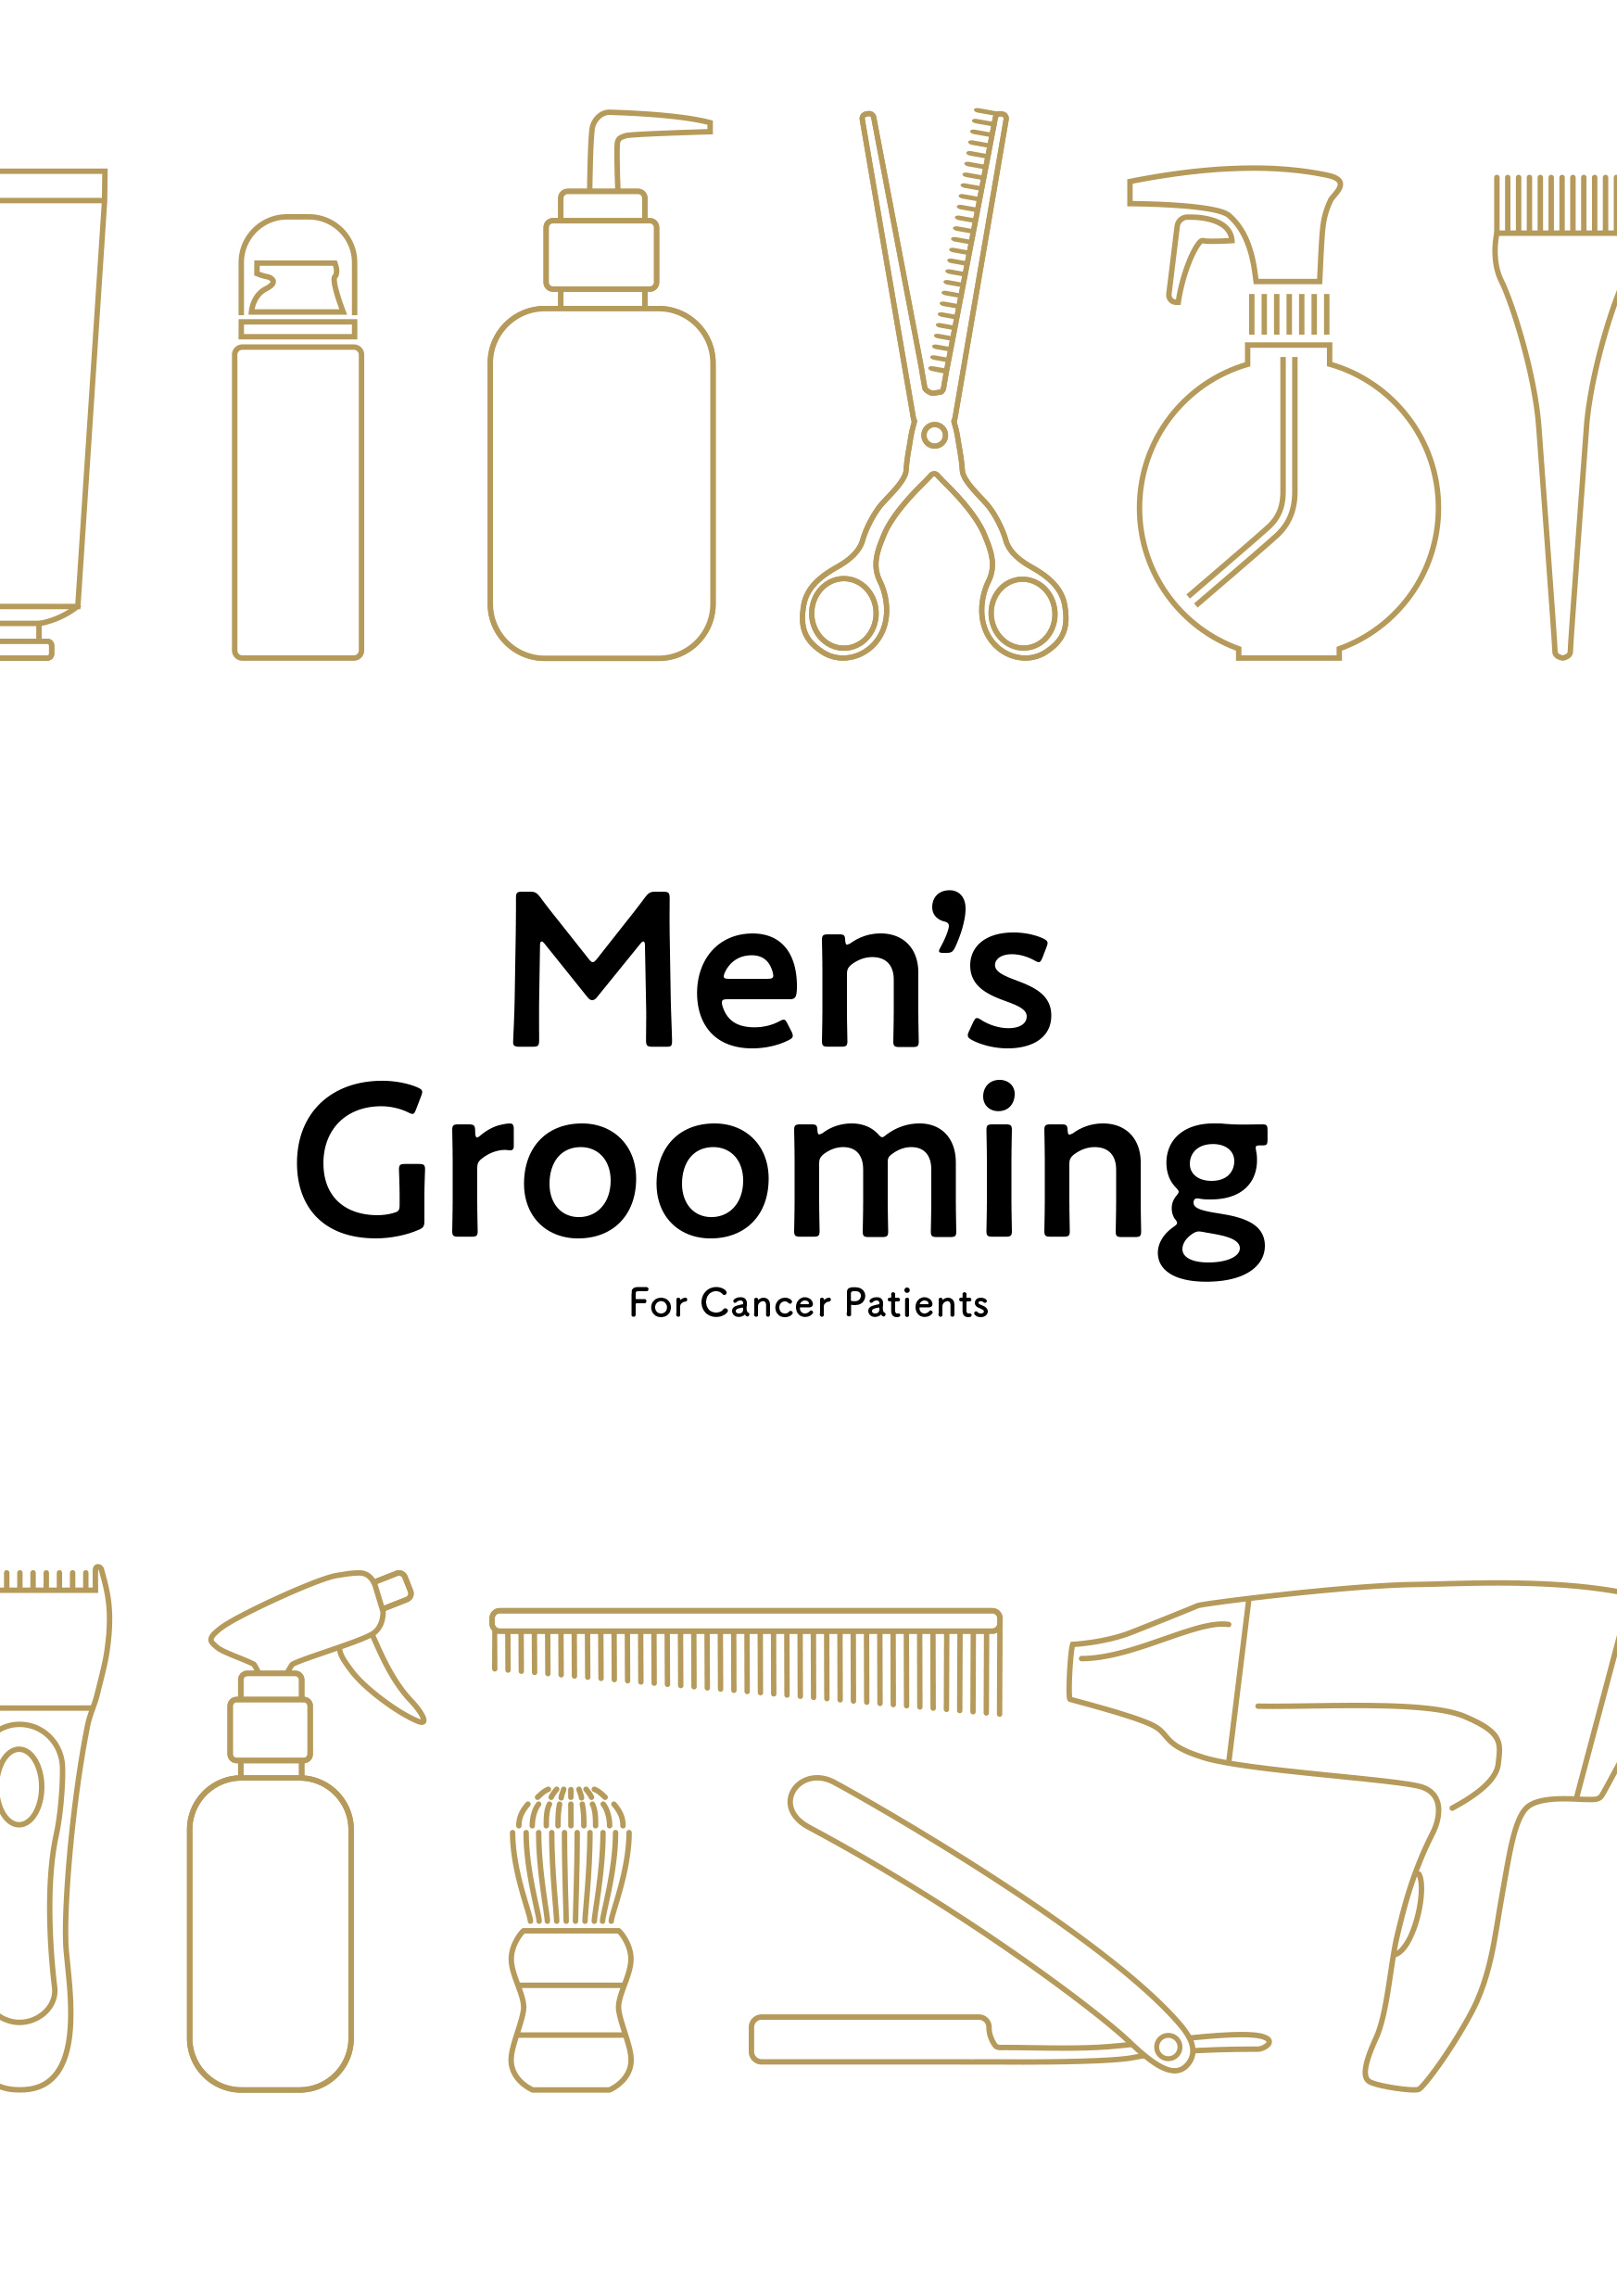 Shiseido Male Grooming for Cancer Patients